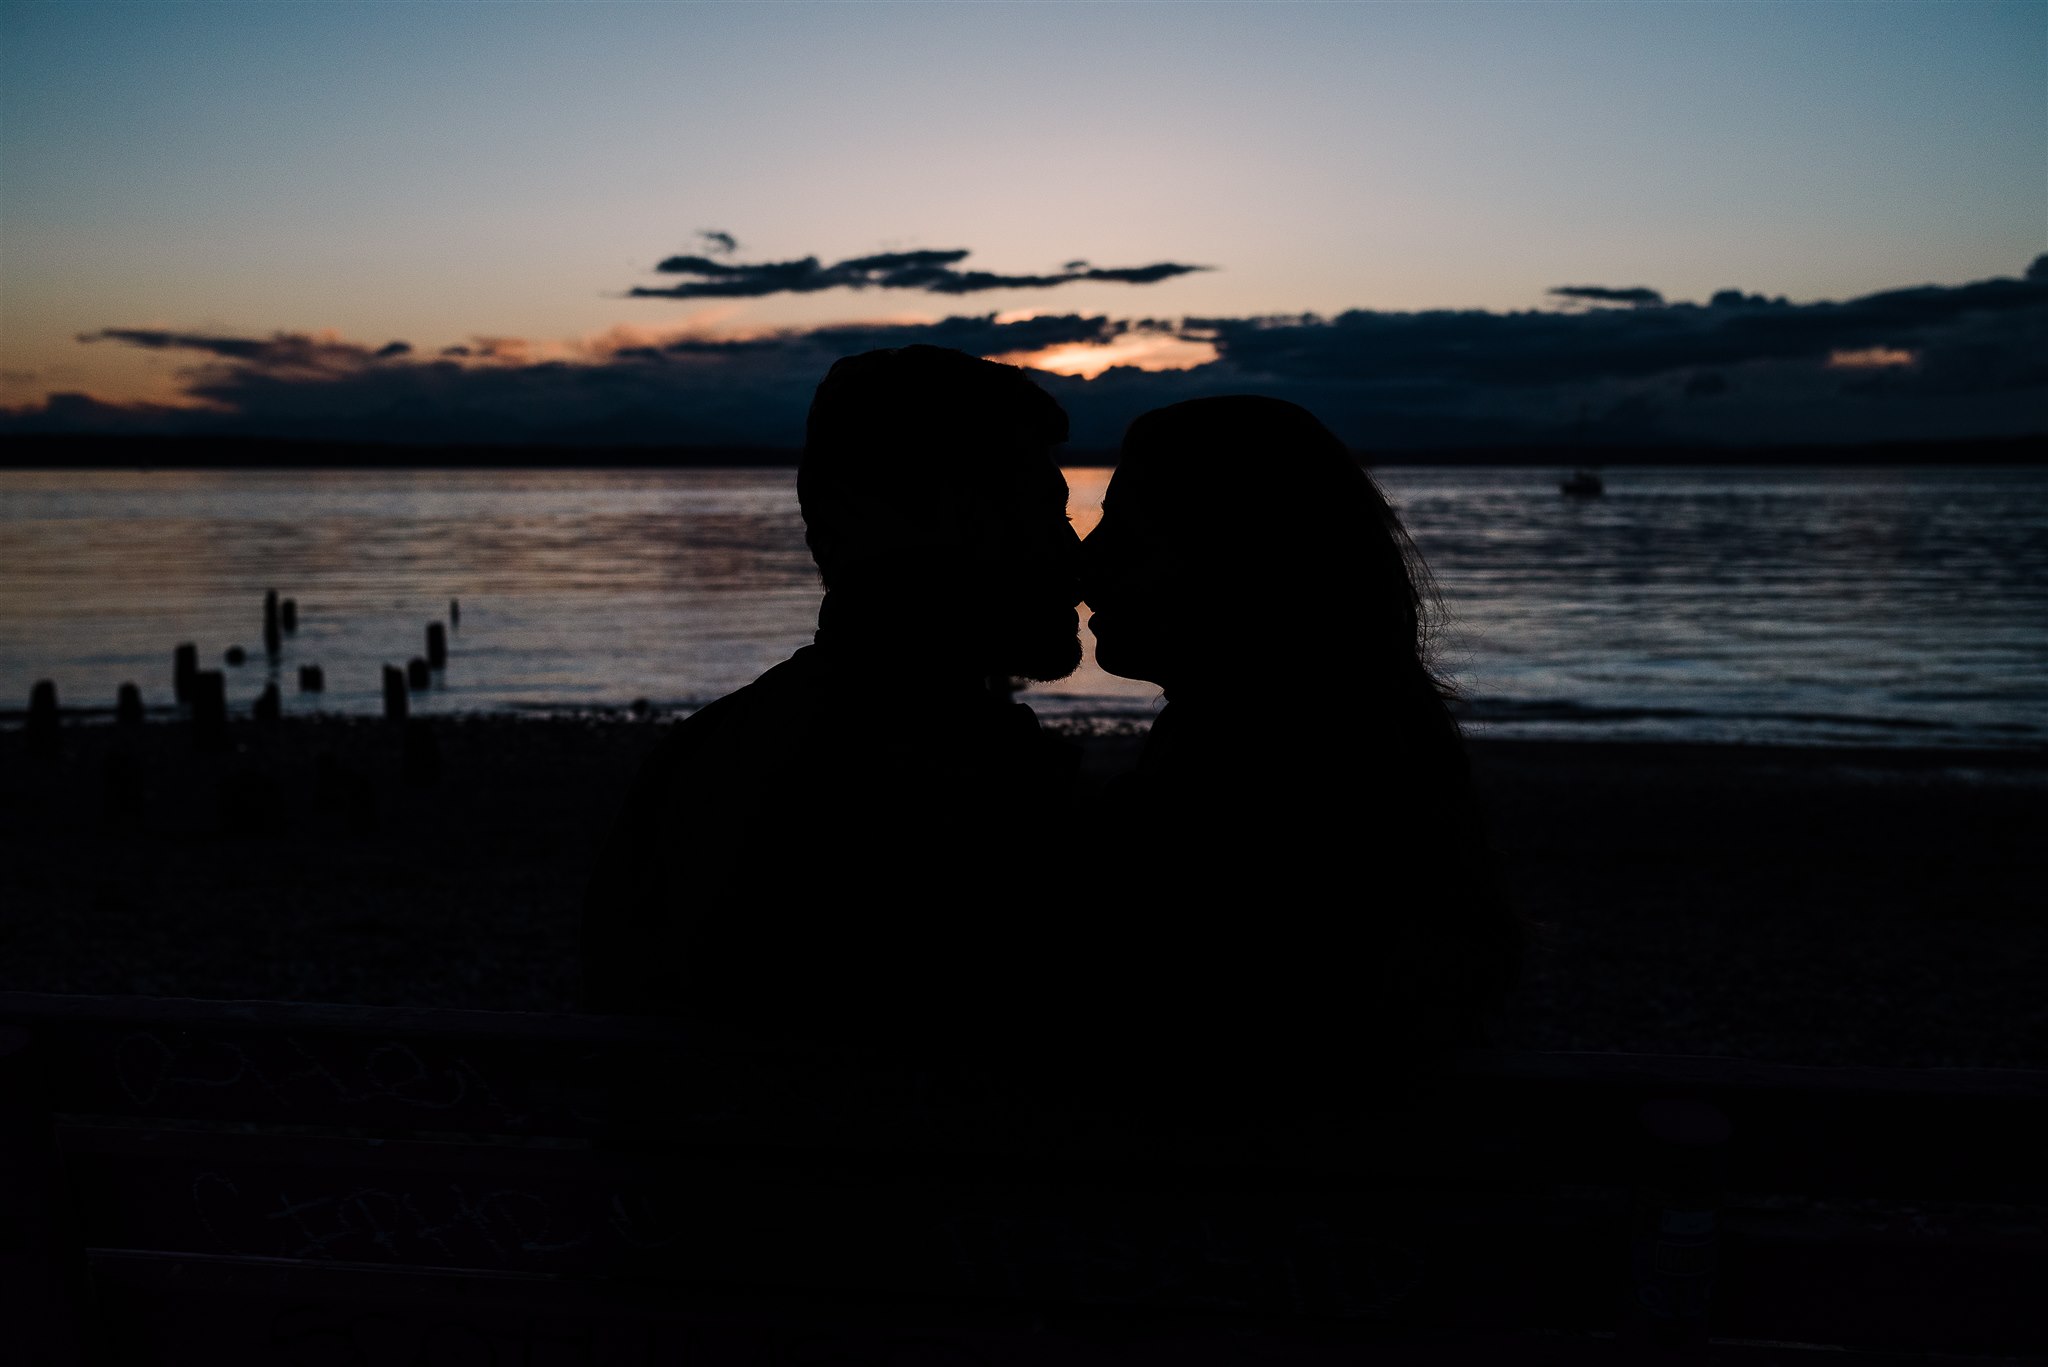 Seattle Engagement Photos, Golden Gardens Engagement Session, Captured by Candace Photography